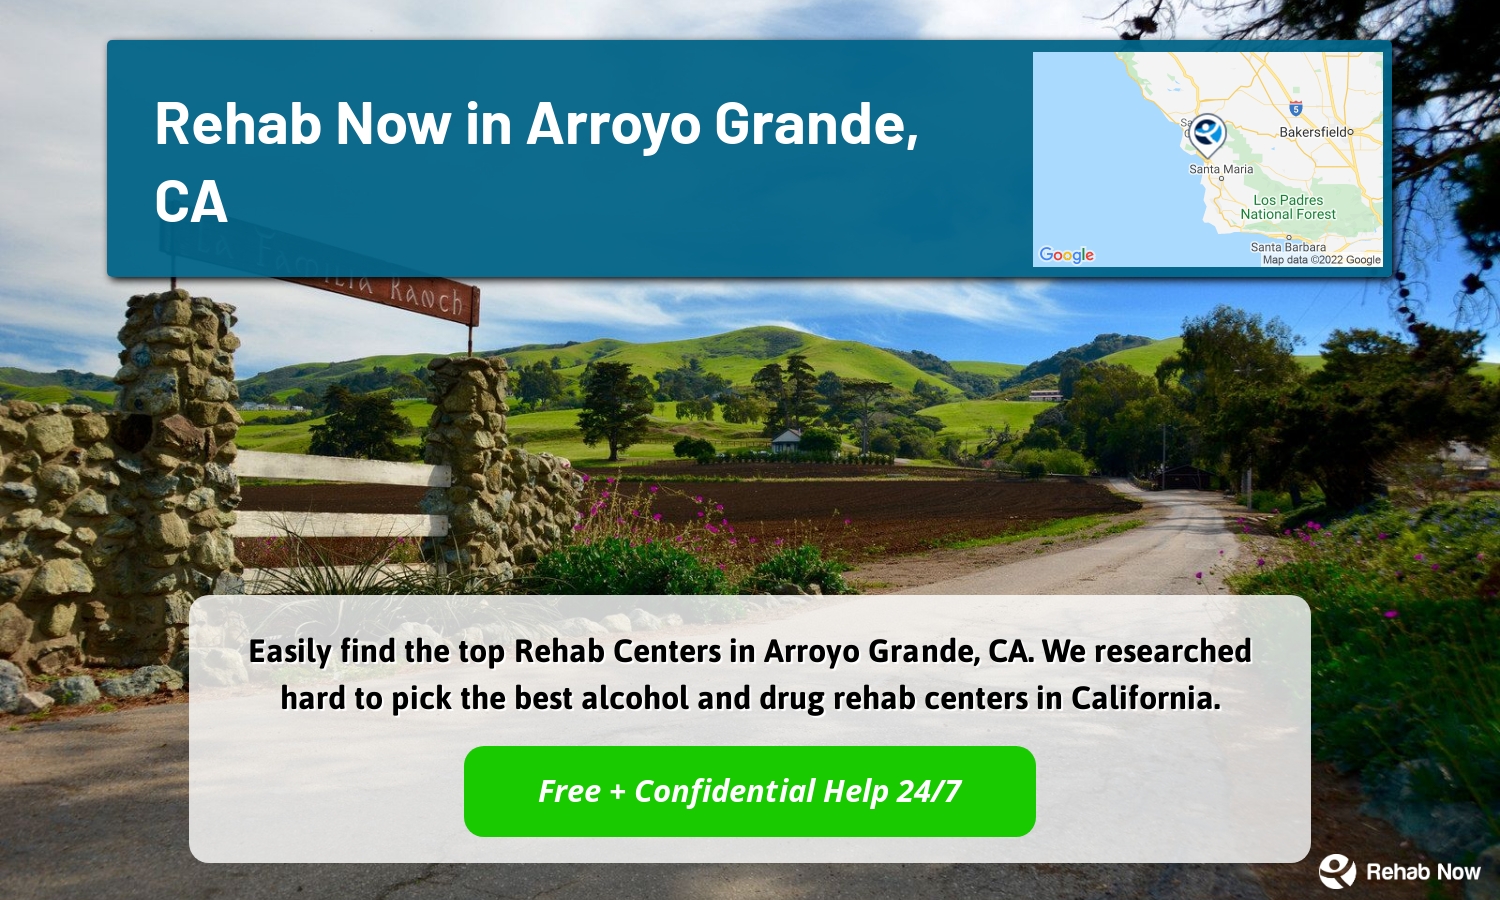 Easily find the top Rehab Centers in Arroyo Grande, CA. We researched hard to pick the best alcohol and drug rehab centers in California.